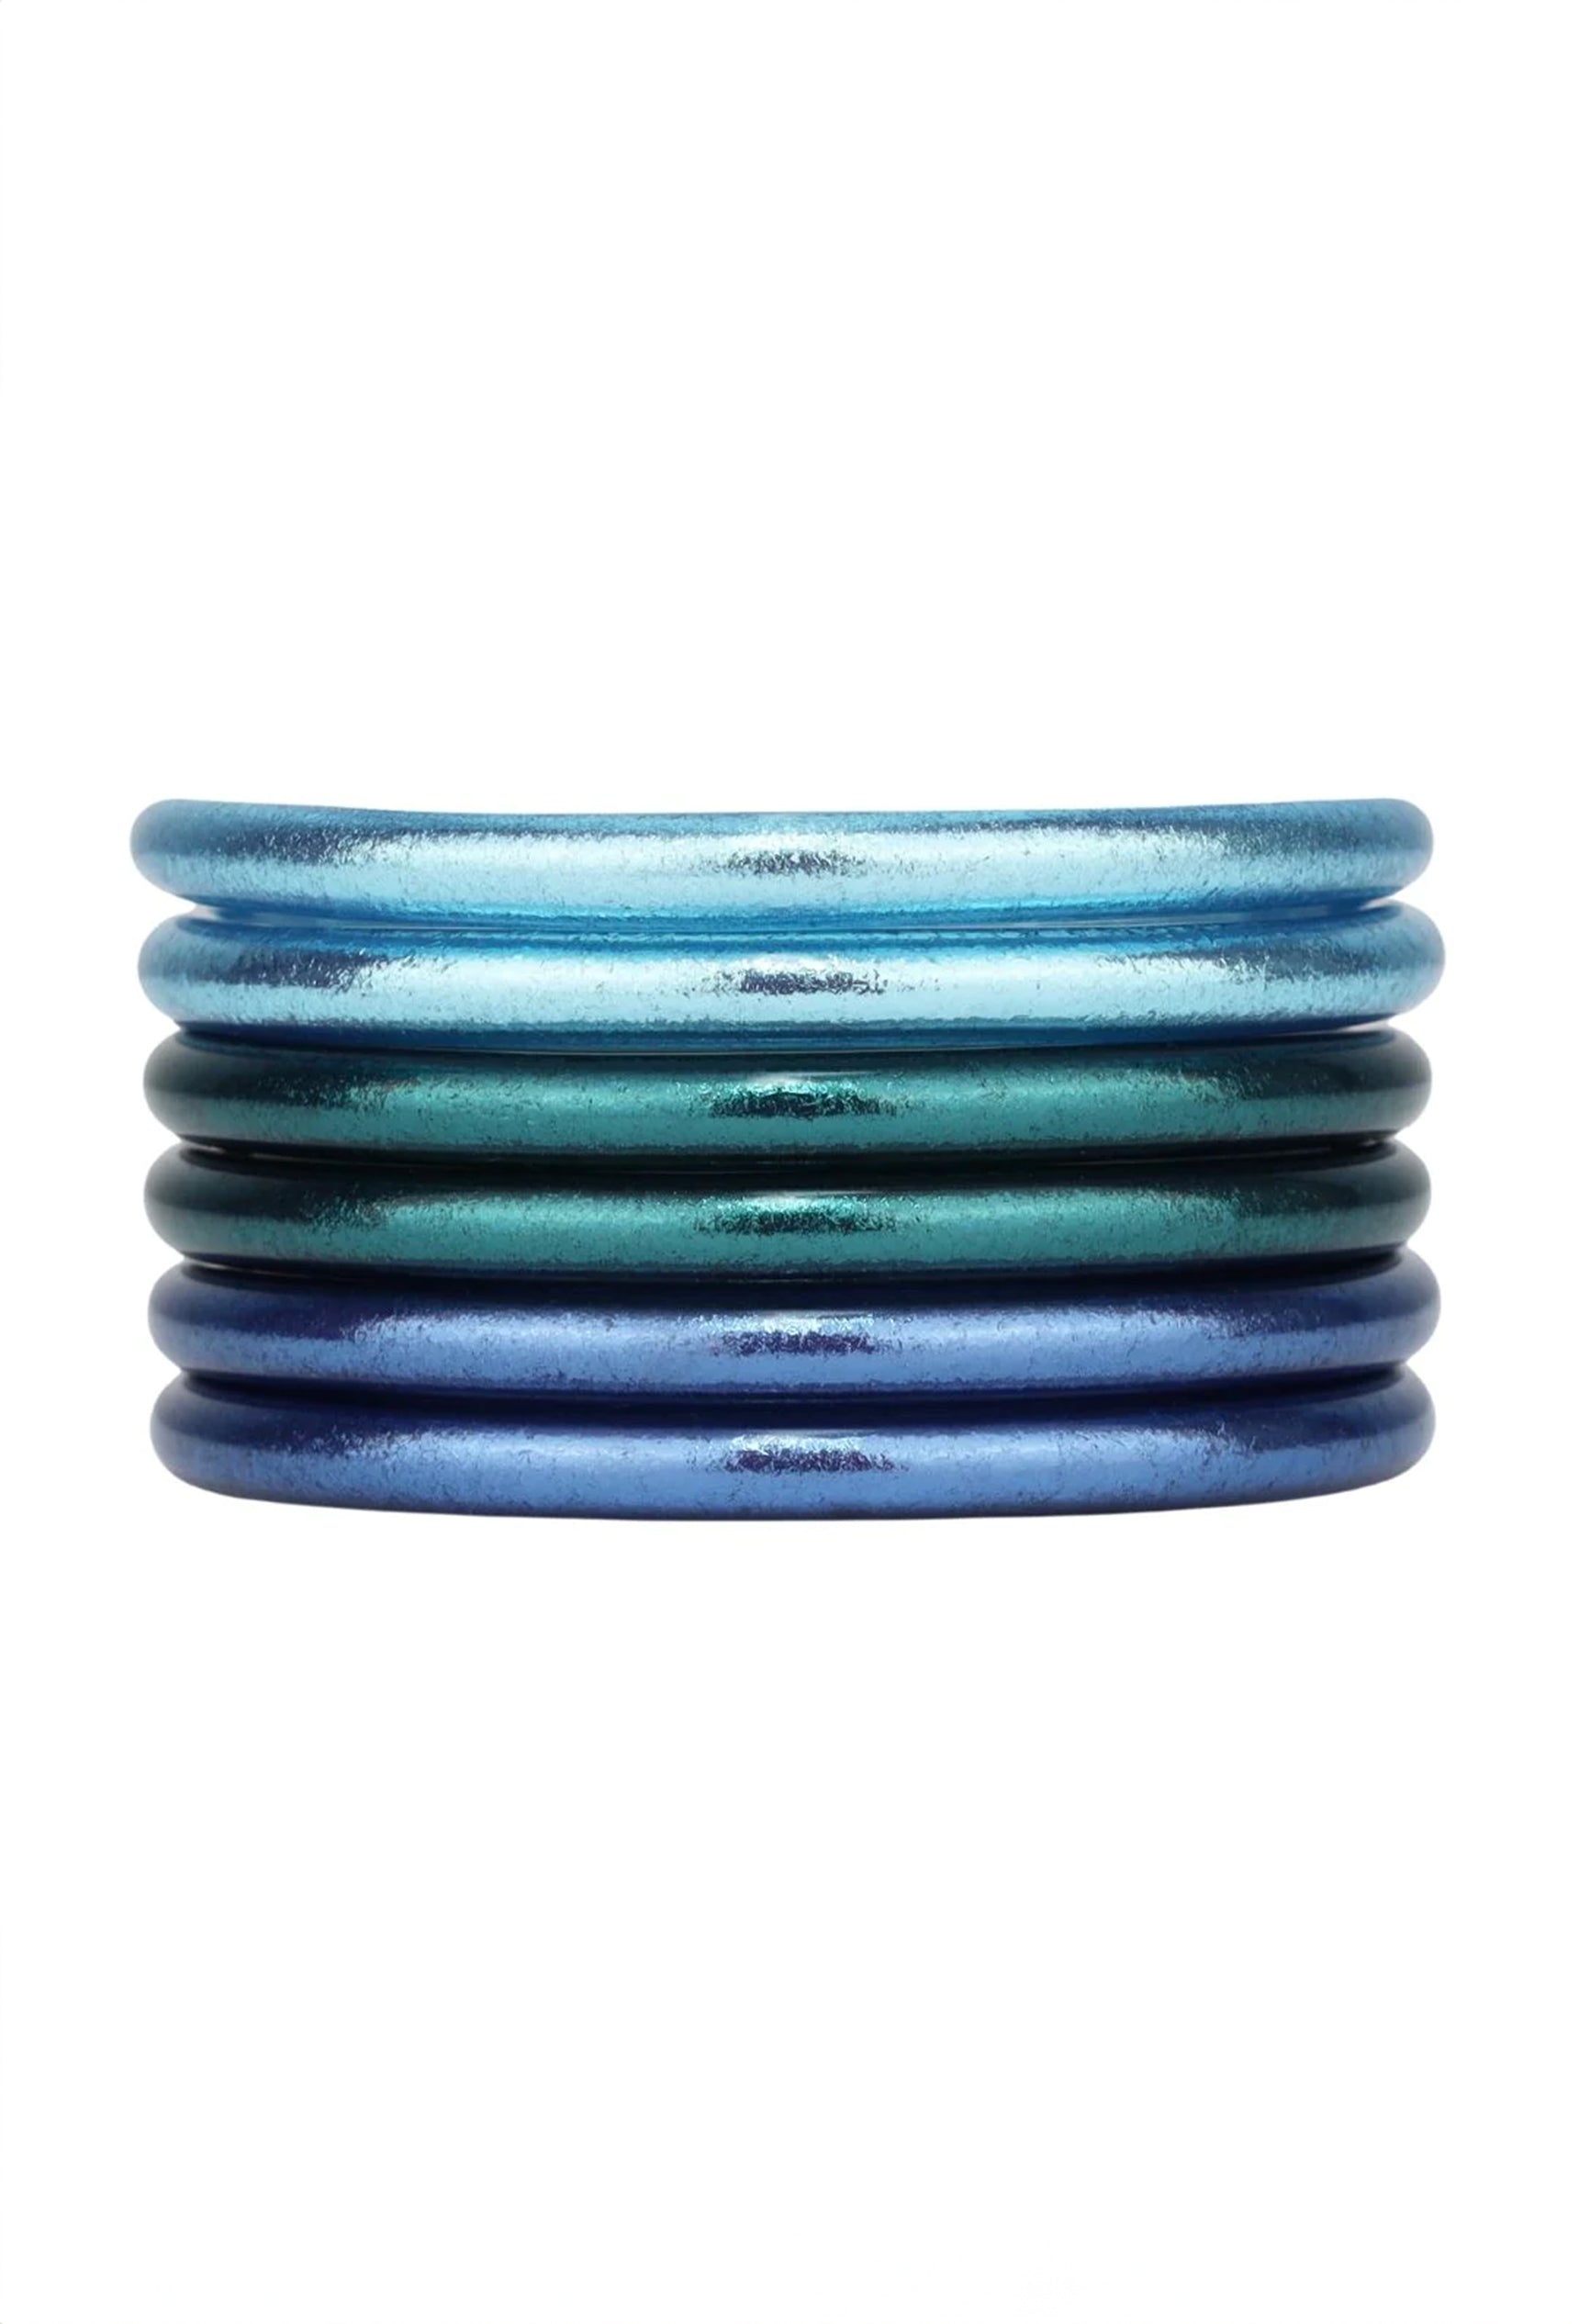 BUDHAGIRL Bangles in all the oceanse, stack of 6 bangles, mix of azure, plume, and marine 